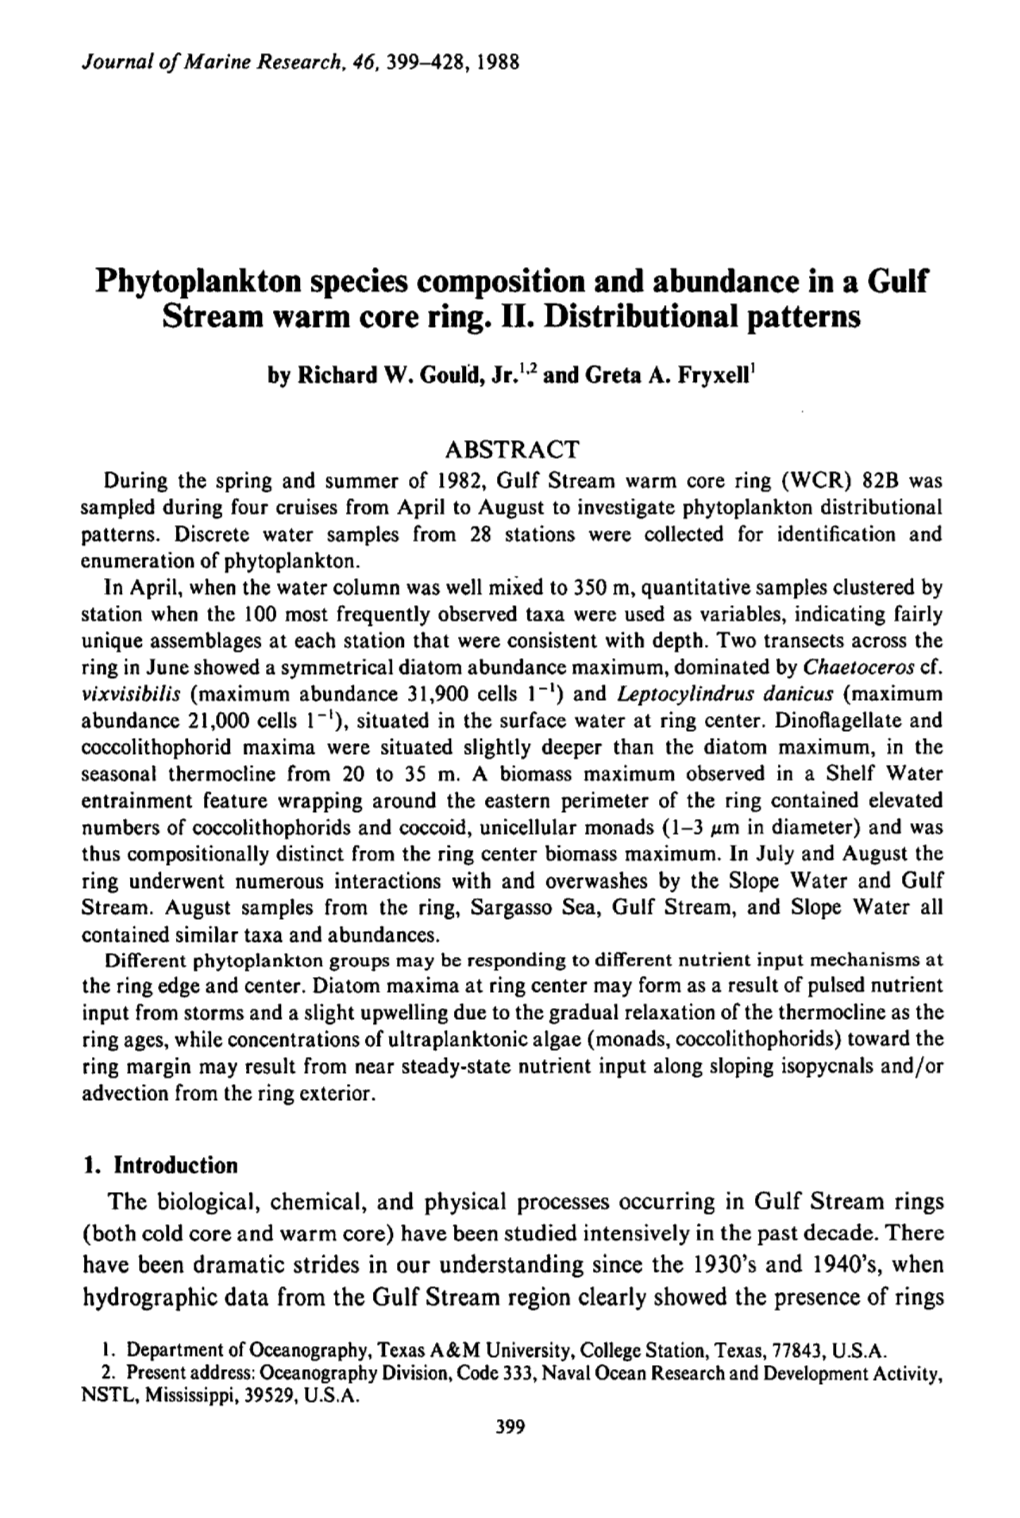 Phytoplankton Species Composition and Abundance in a Gulf Stream Warm Core Ring. II. Distributional Patterns